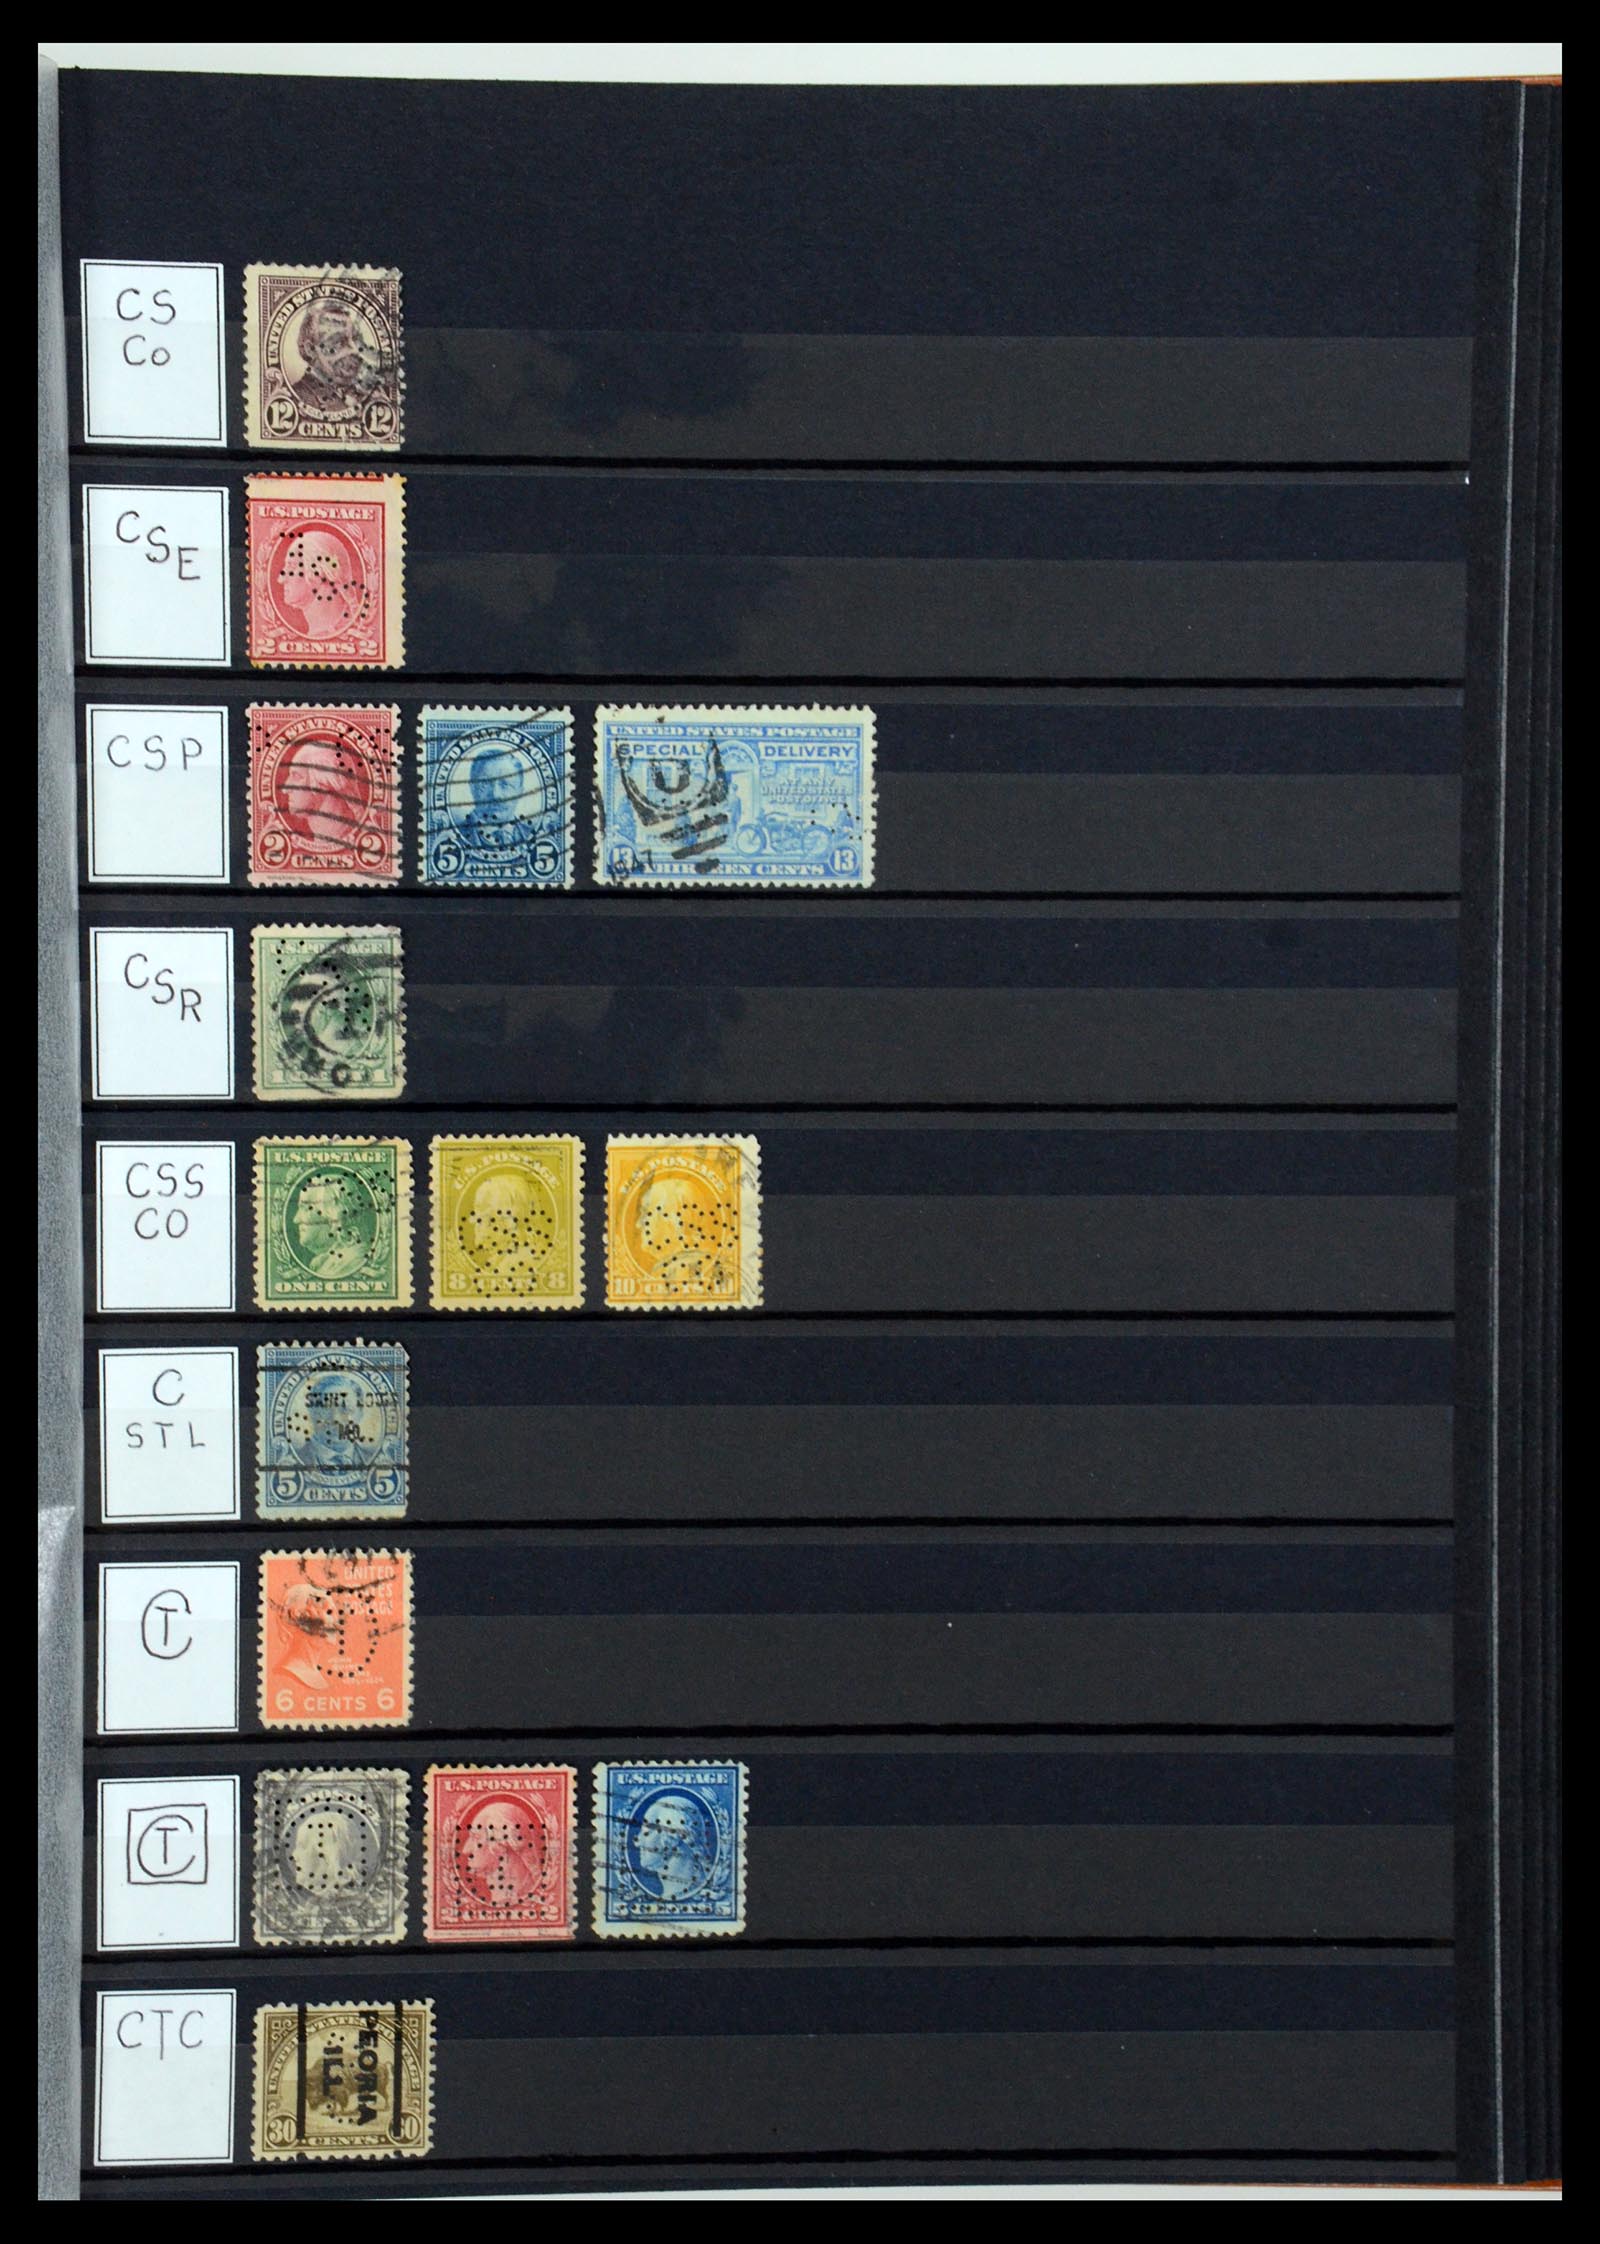 36388 033 - Stamp collection 36388 USA perfins.